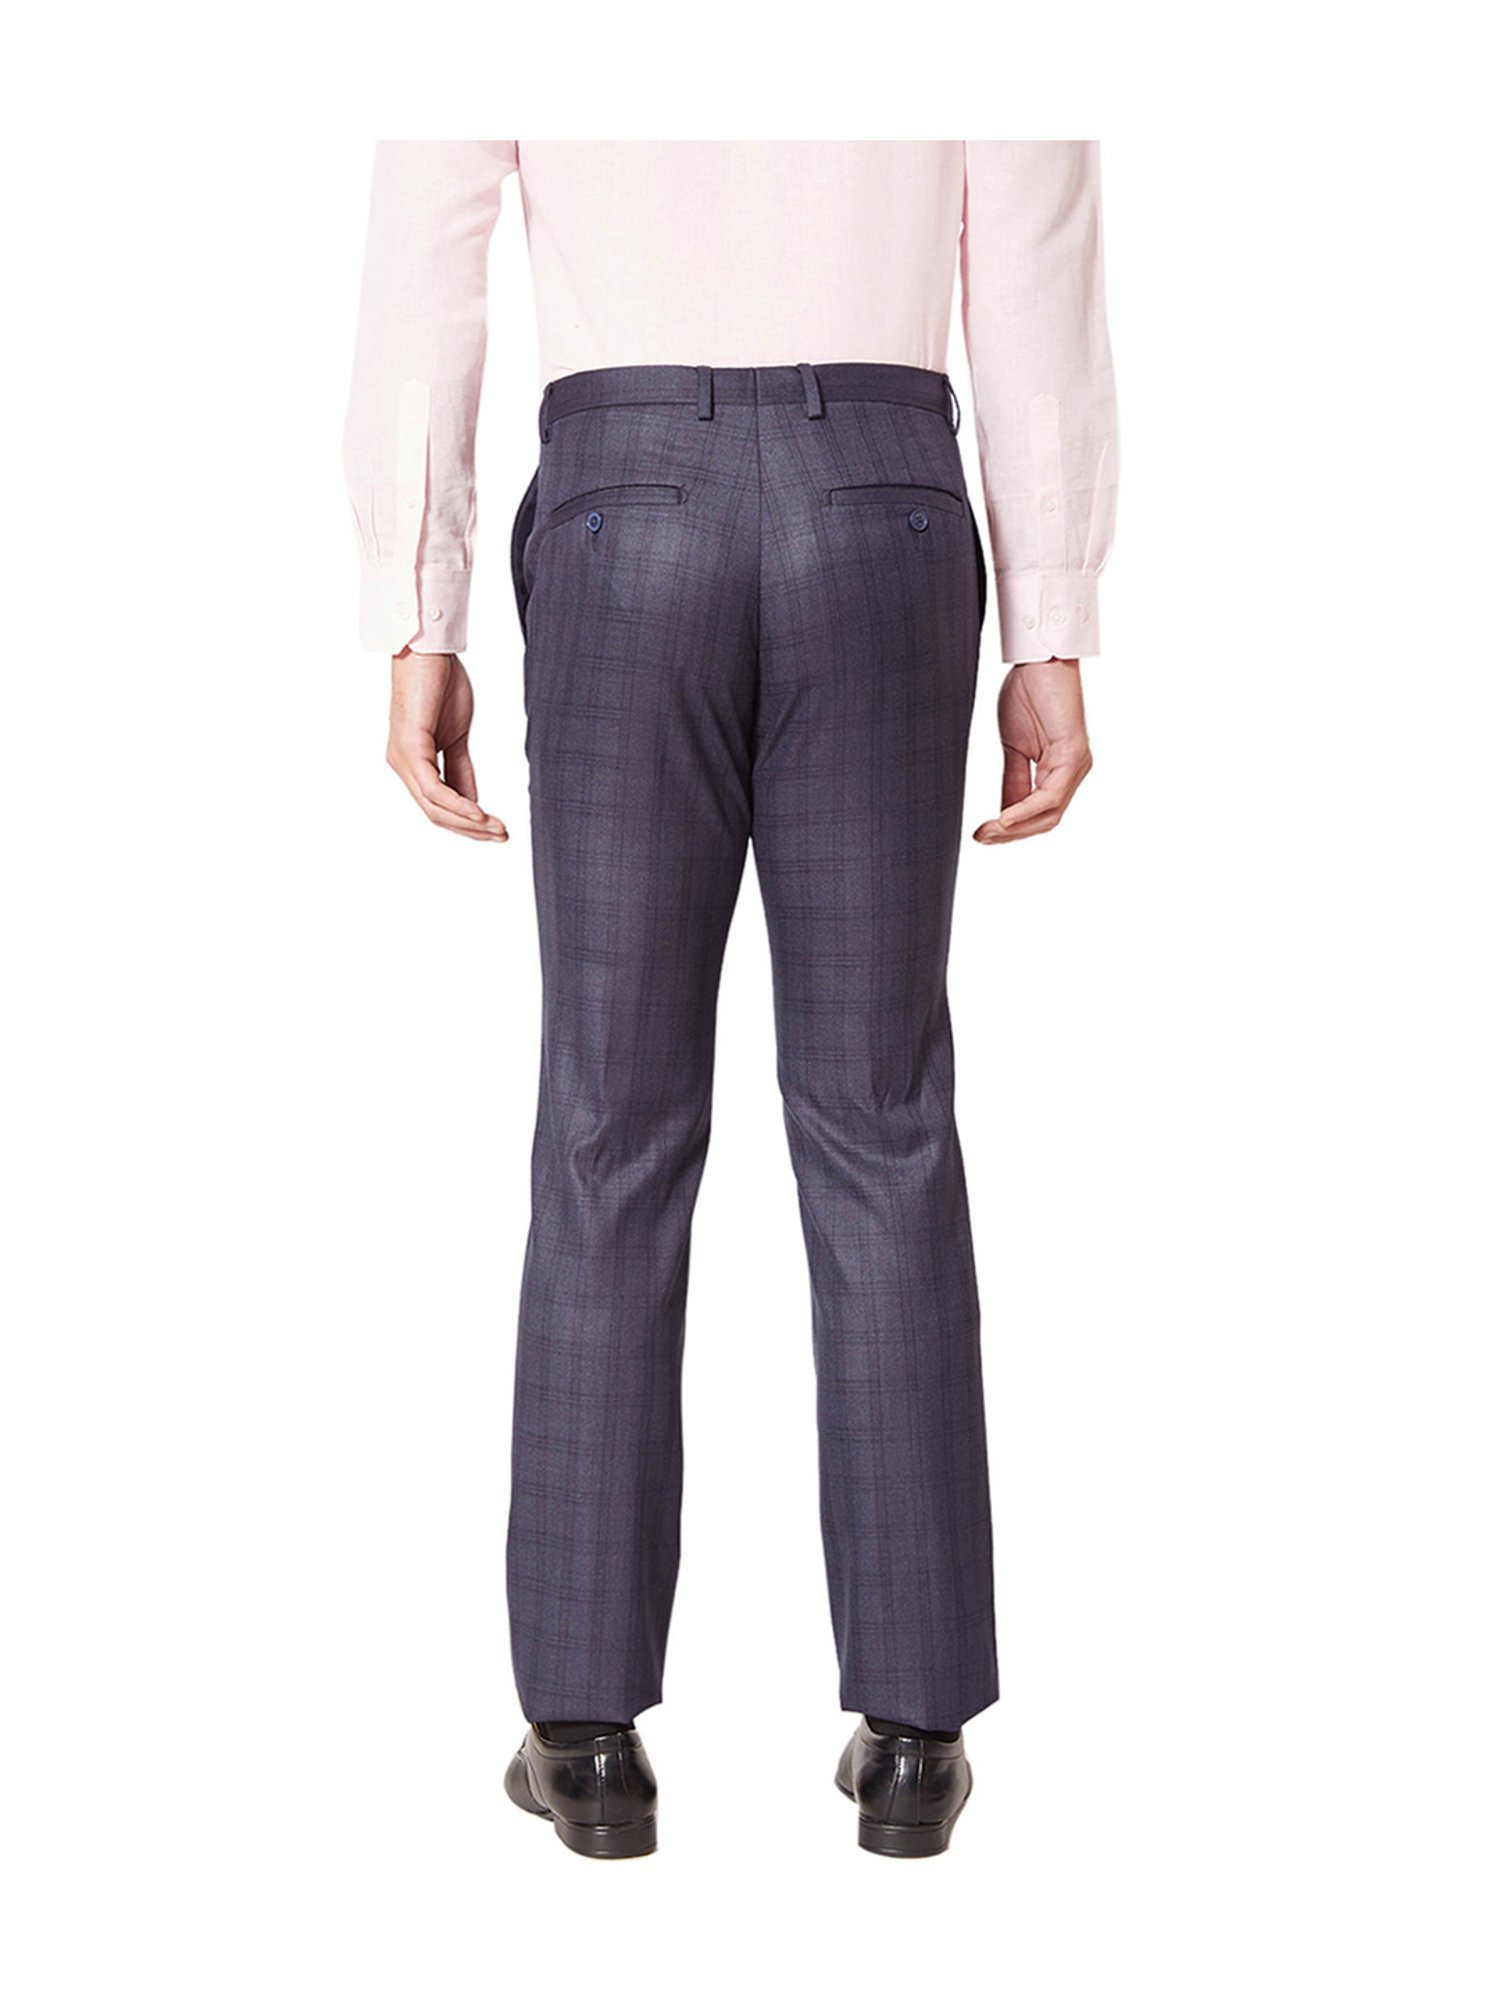 Buy Grey Trousers & Pants for Men by OXEMBERG Online | Ajio.com